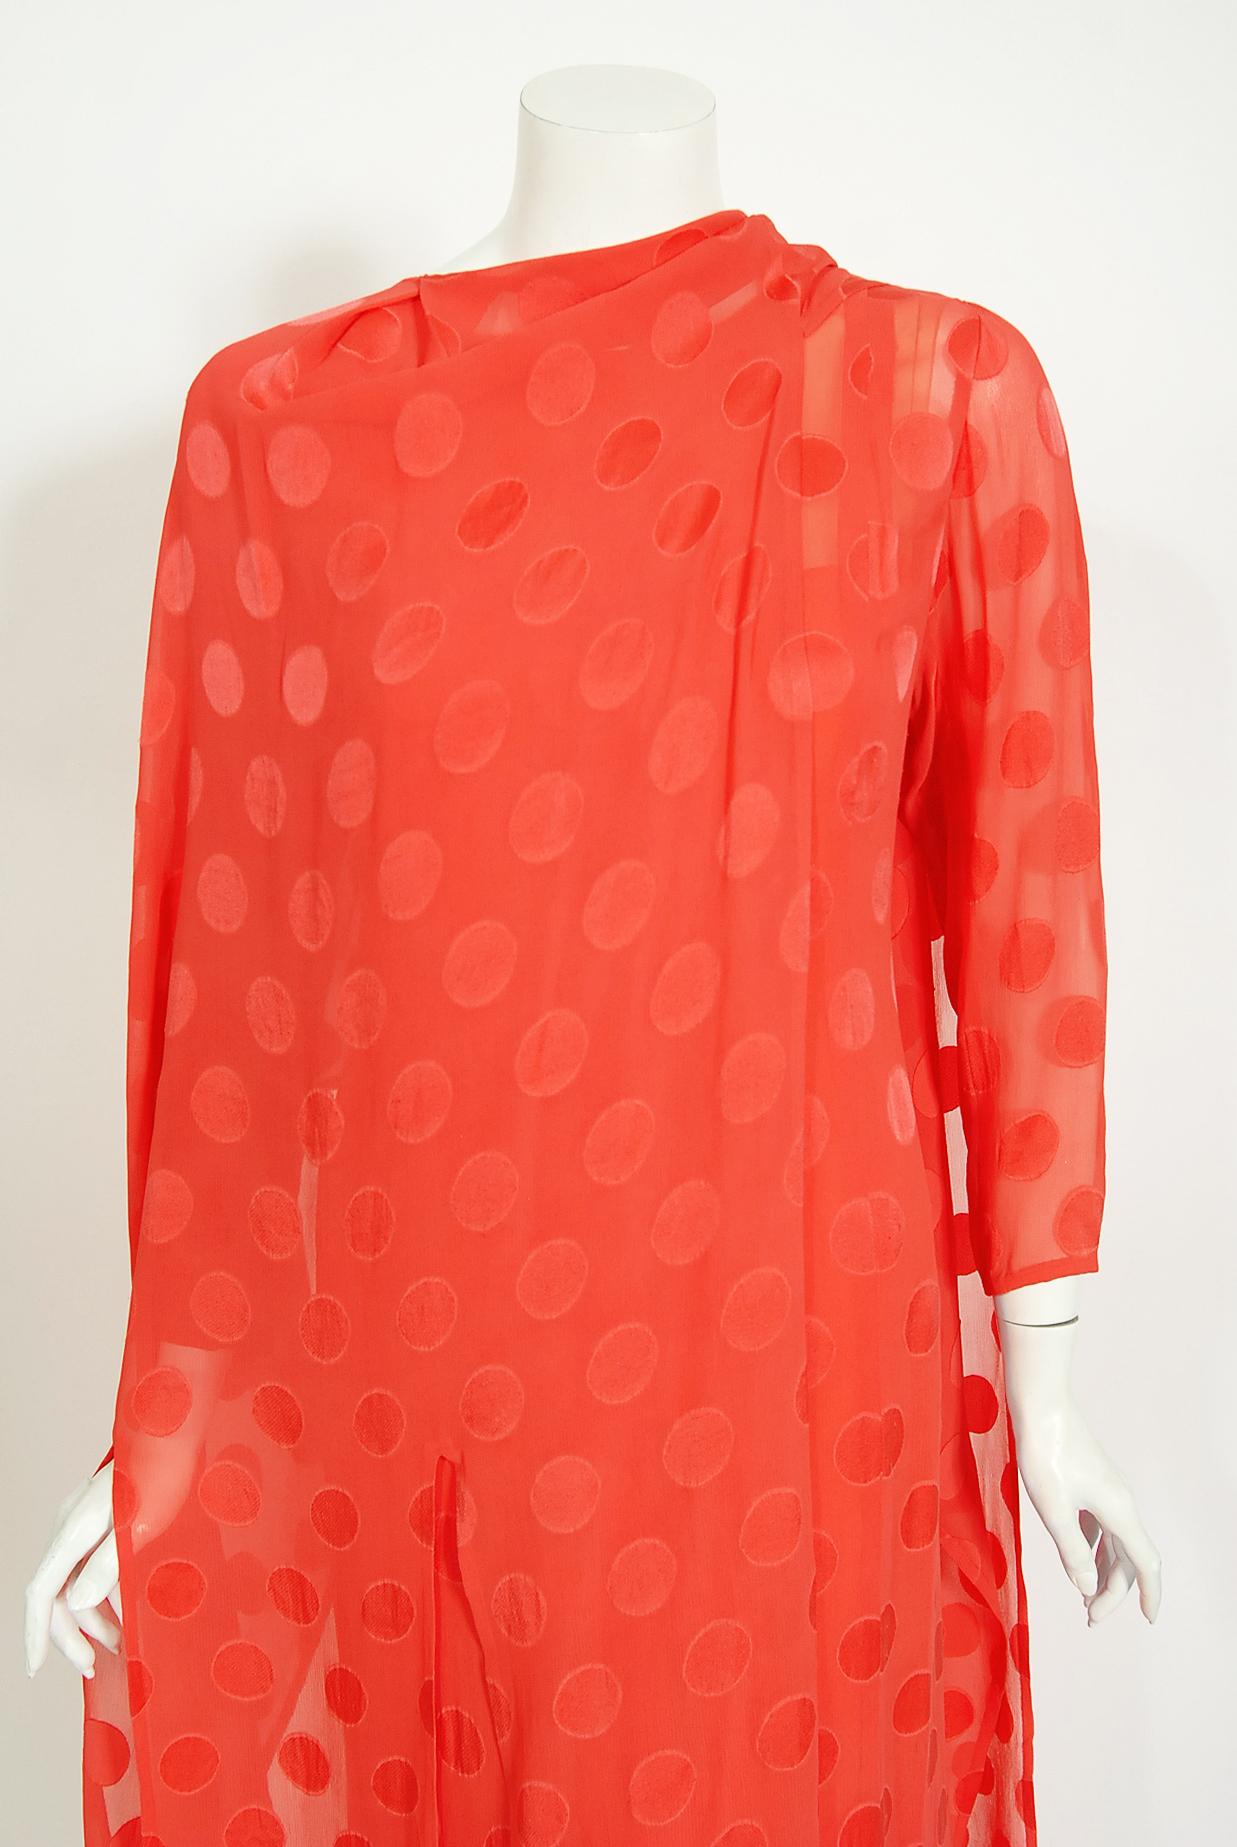 Vintage 1973 Givenchy Haute Couture Orange Dotted Silk Carwash-Hem Caftan Gown In Good Condition For Sale In Beverly Hills, CA